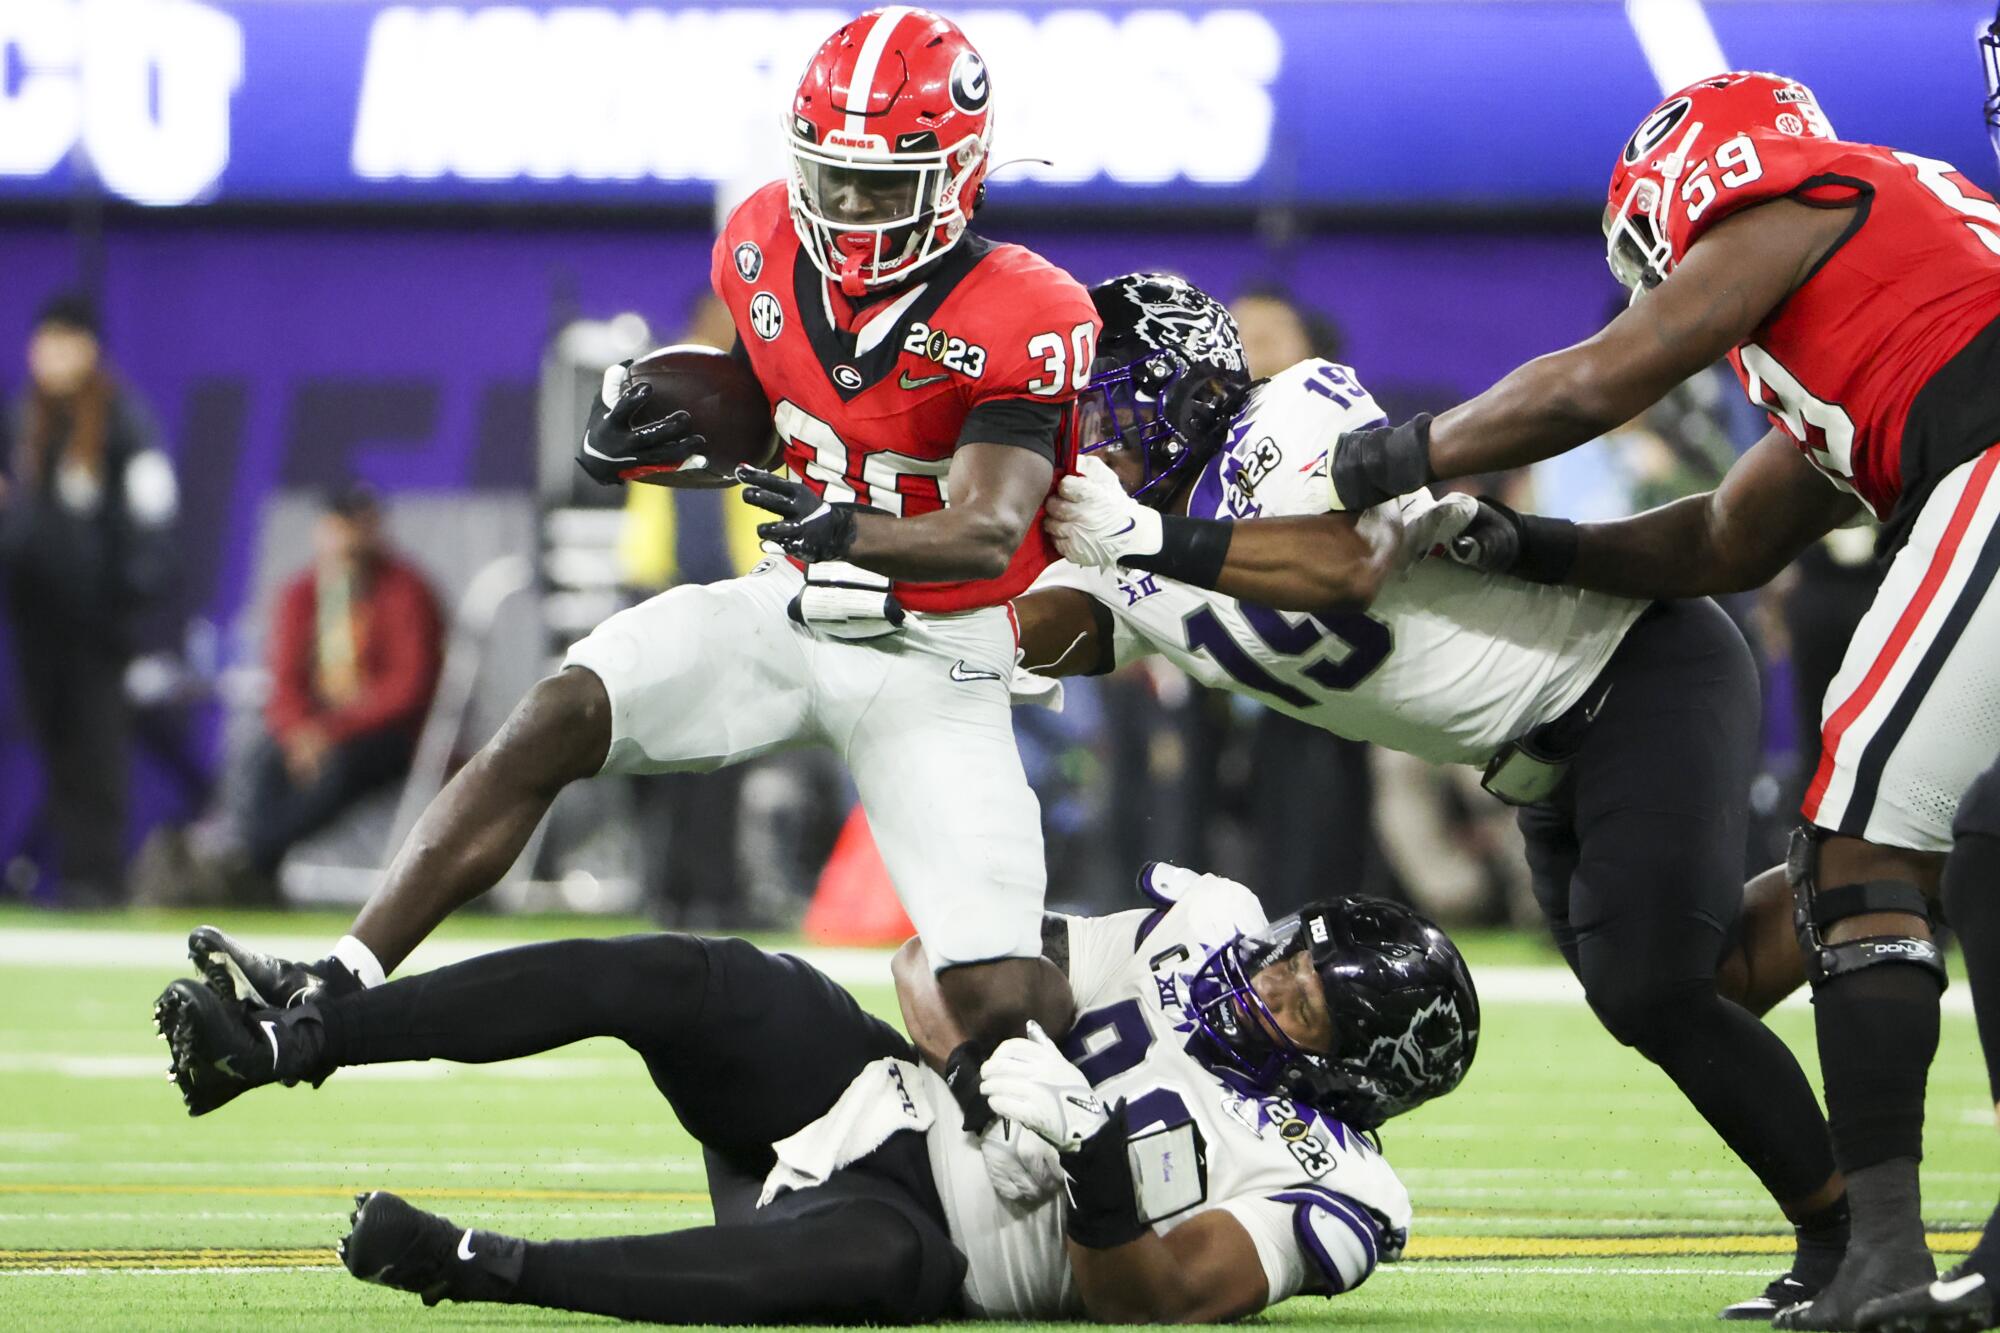 Georgia running back Daijun Edwards carries the ball against TCU in the second half.